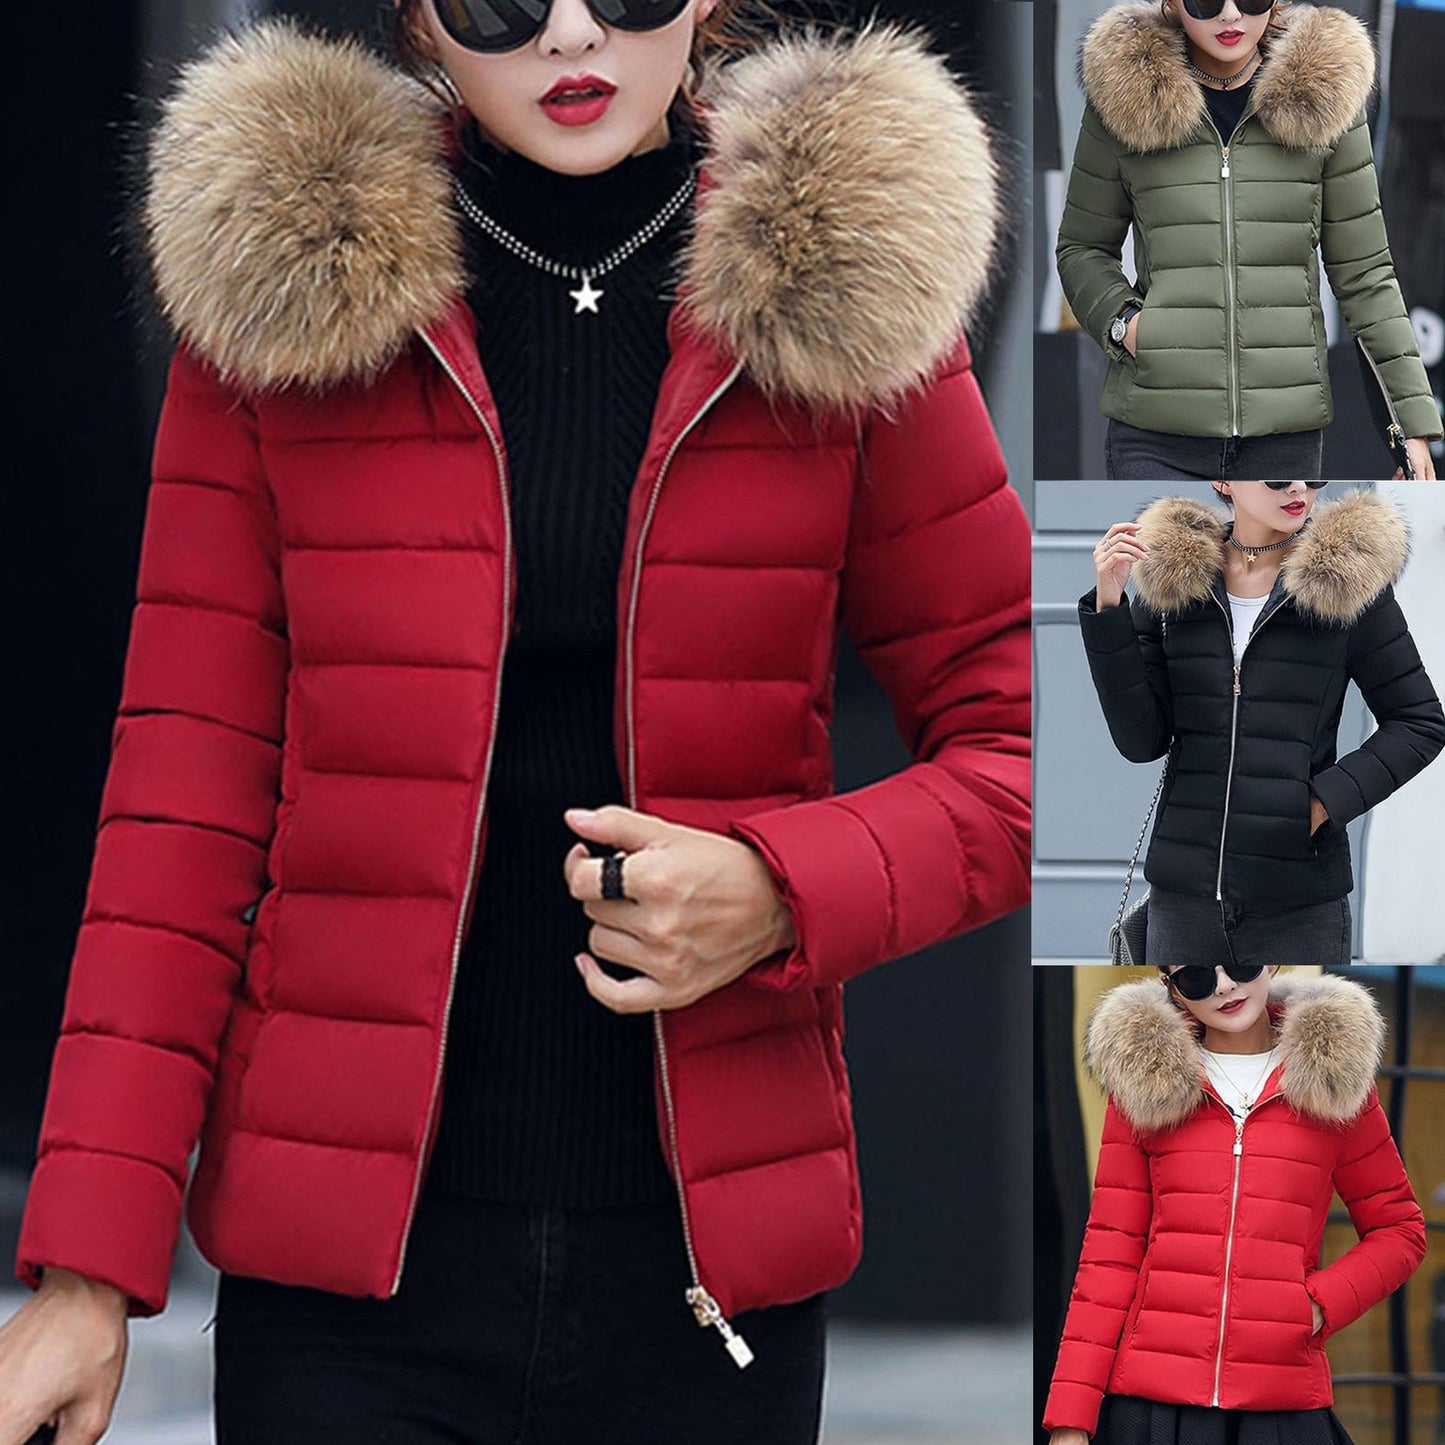 "Warm and Stylish Parka Padded Jackets for Men and Women"